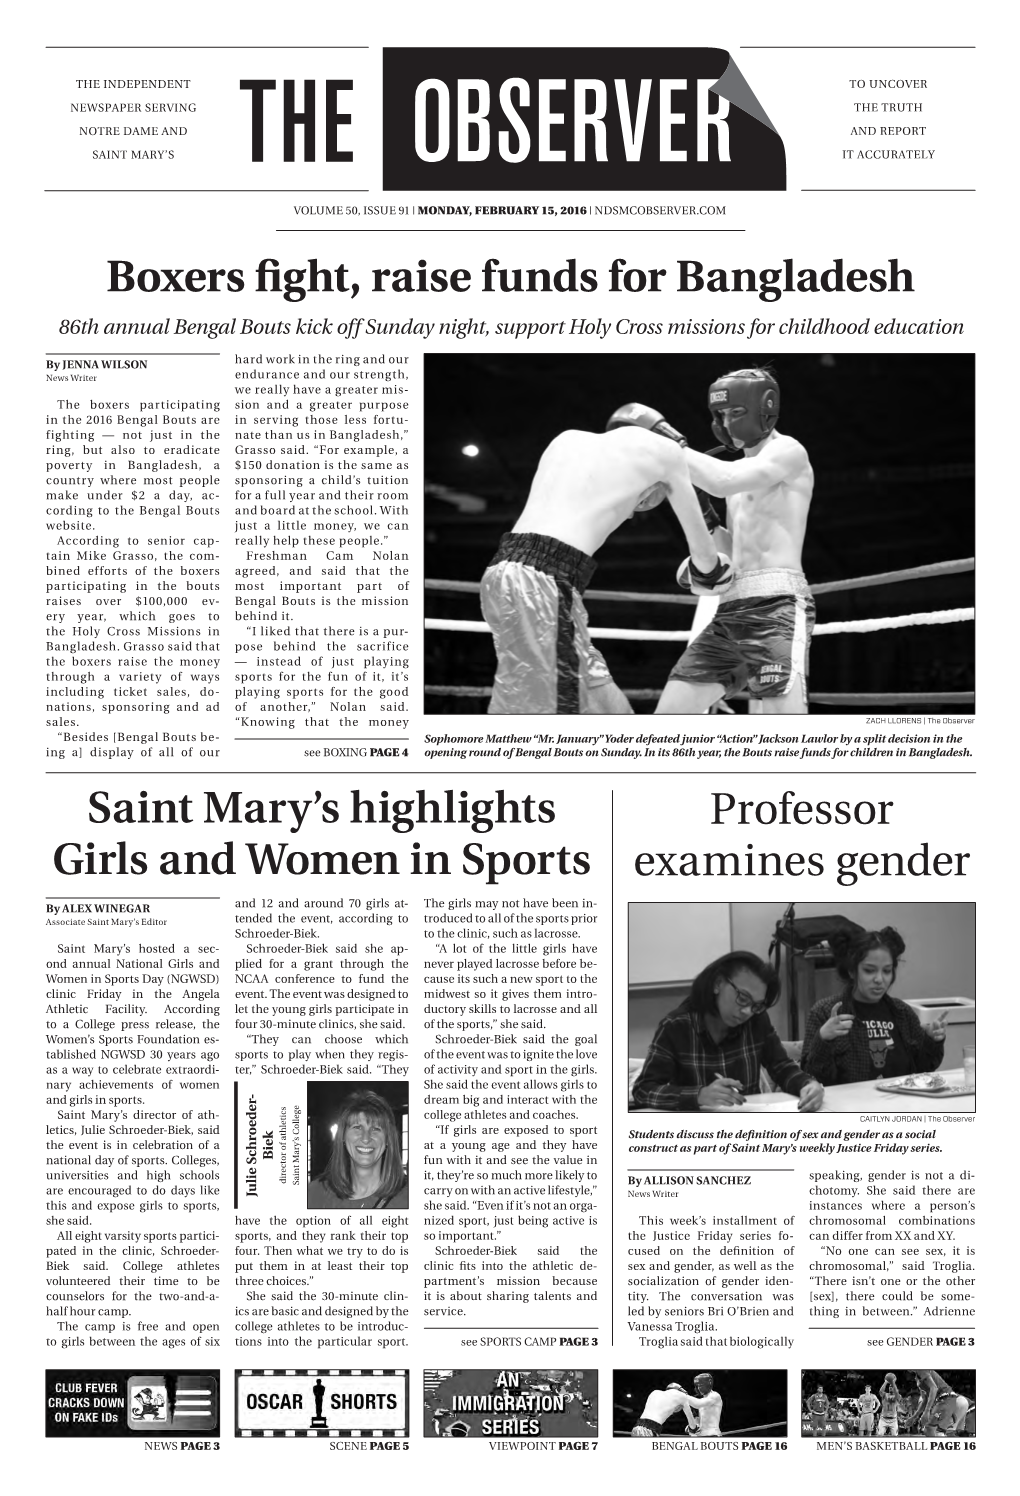 Boxers Fight, Raise Funds for Bangladesh Professor Examines